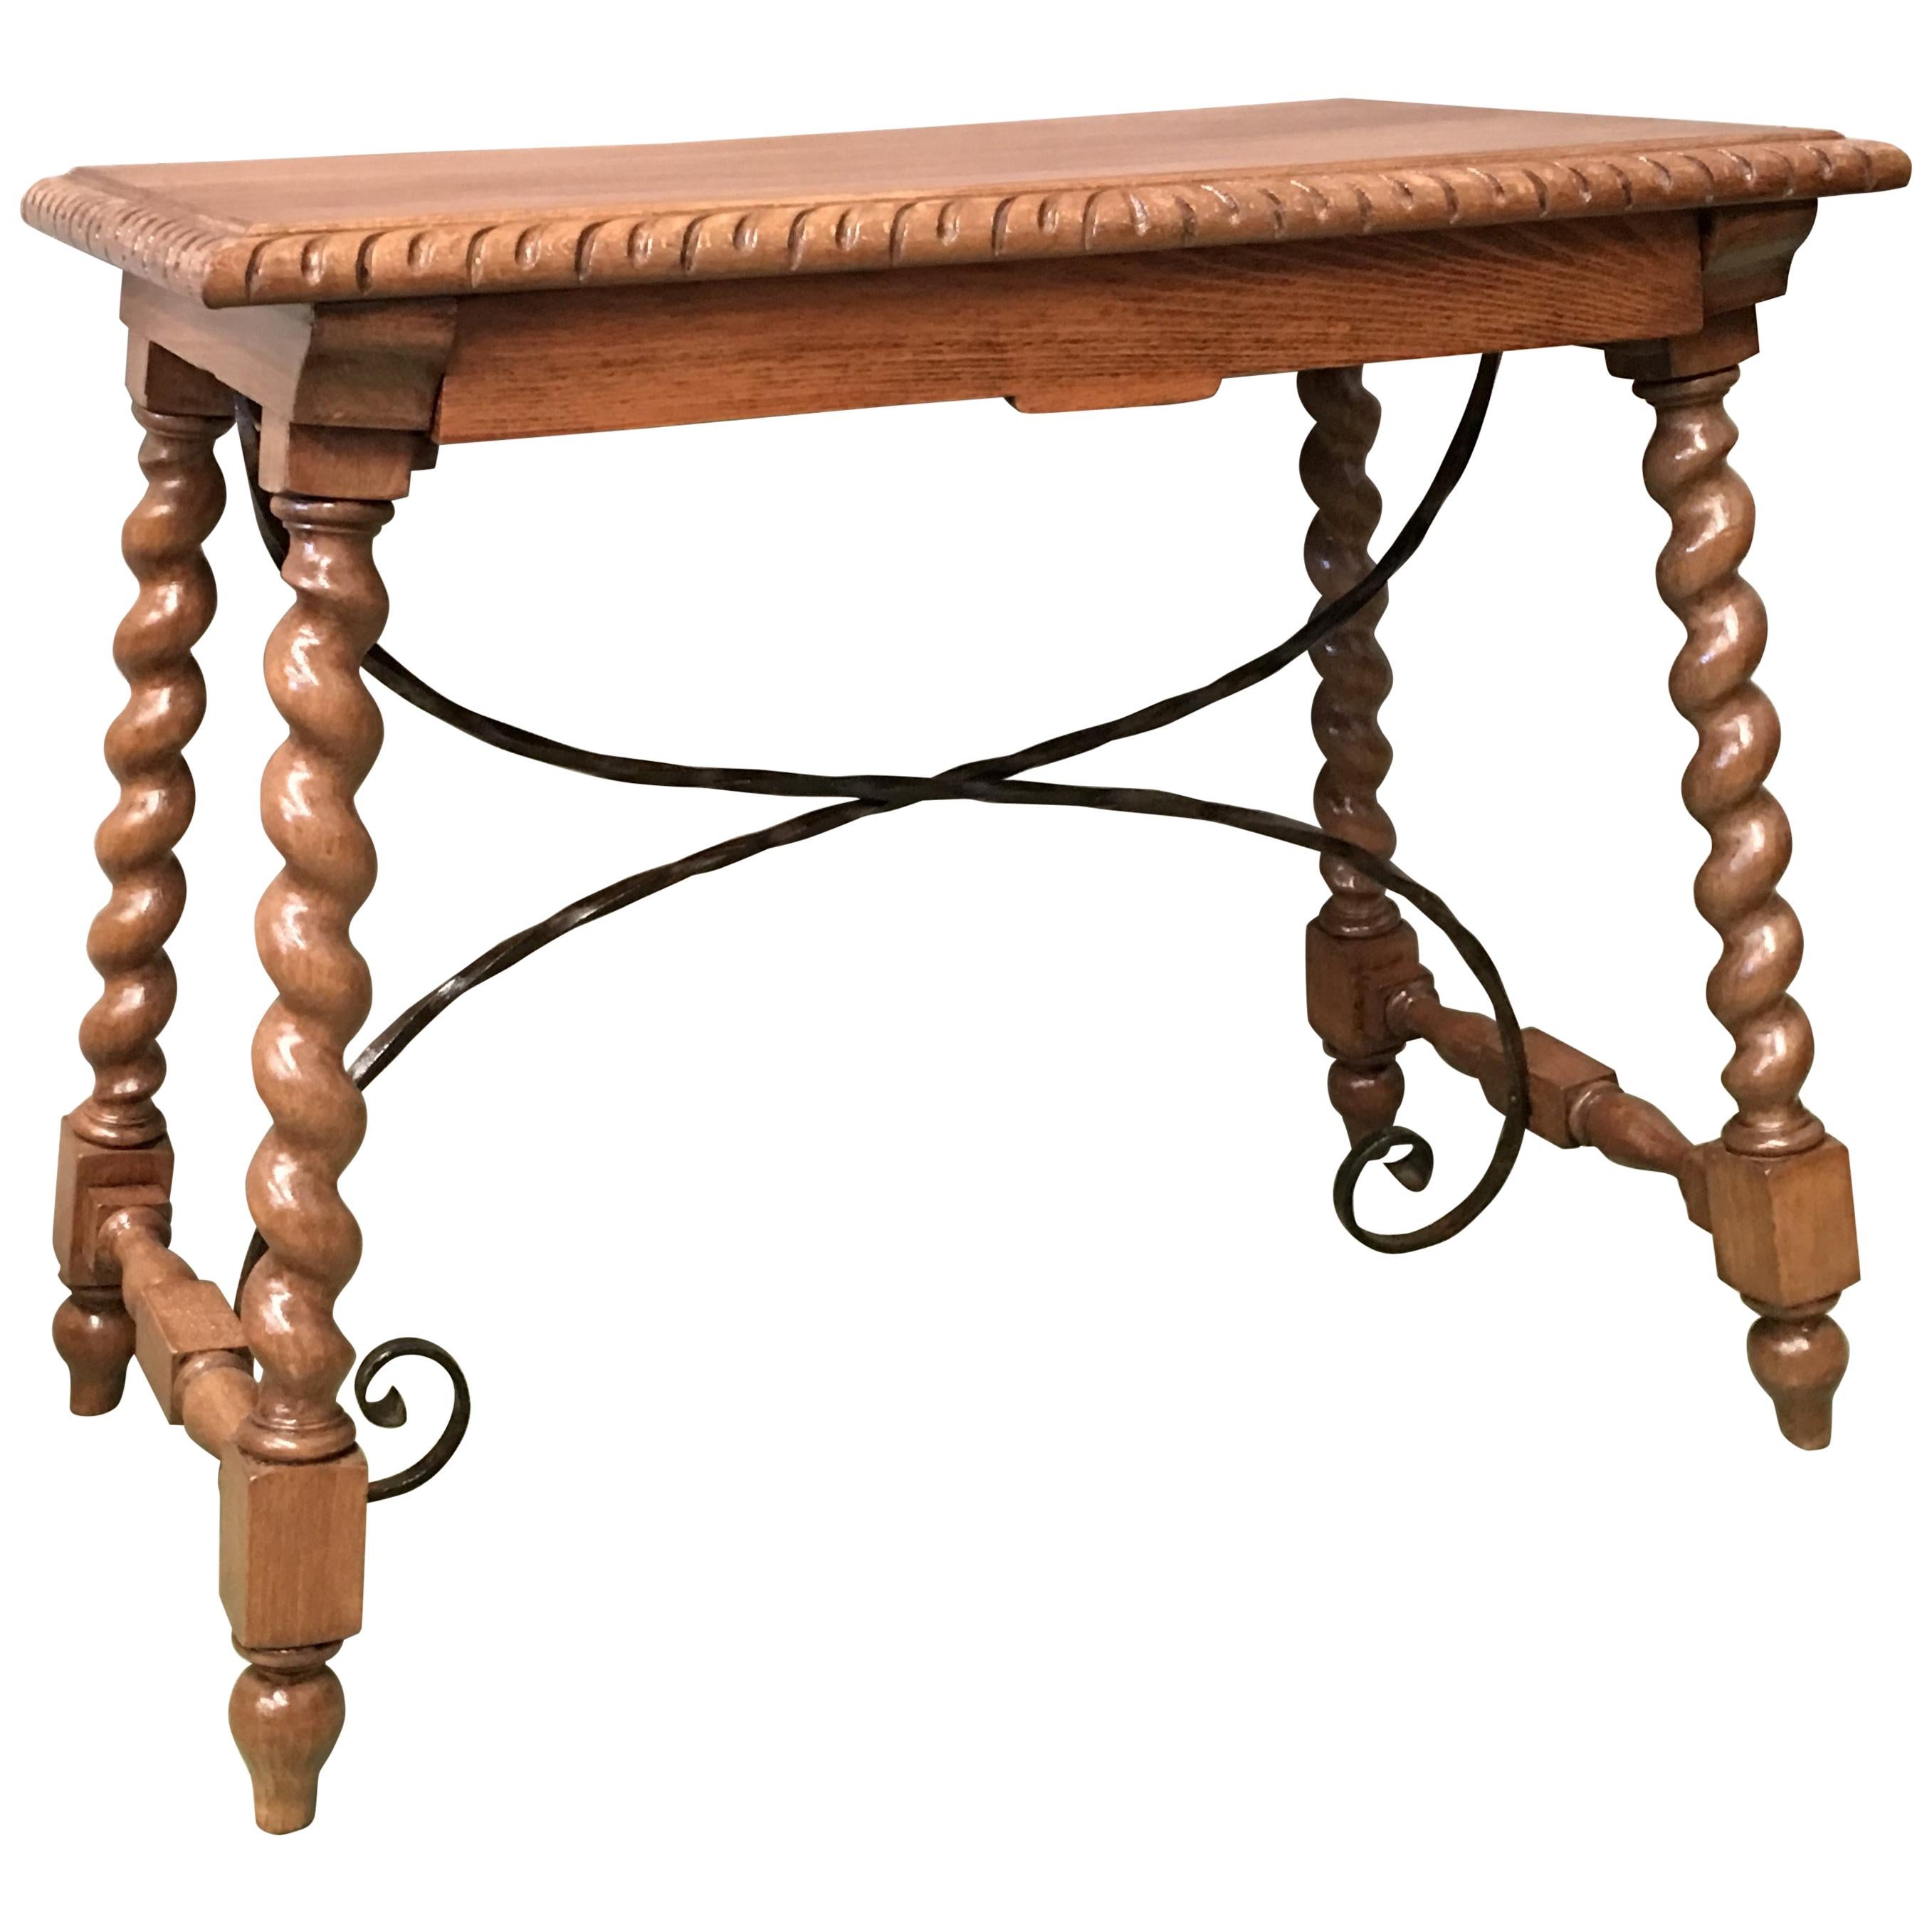 19th Spanish Farm Table with Iron Stretchers, Hand-Carved Top and Drawer